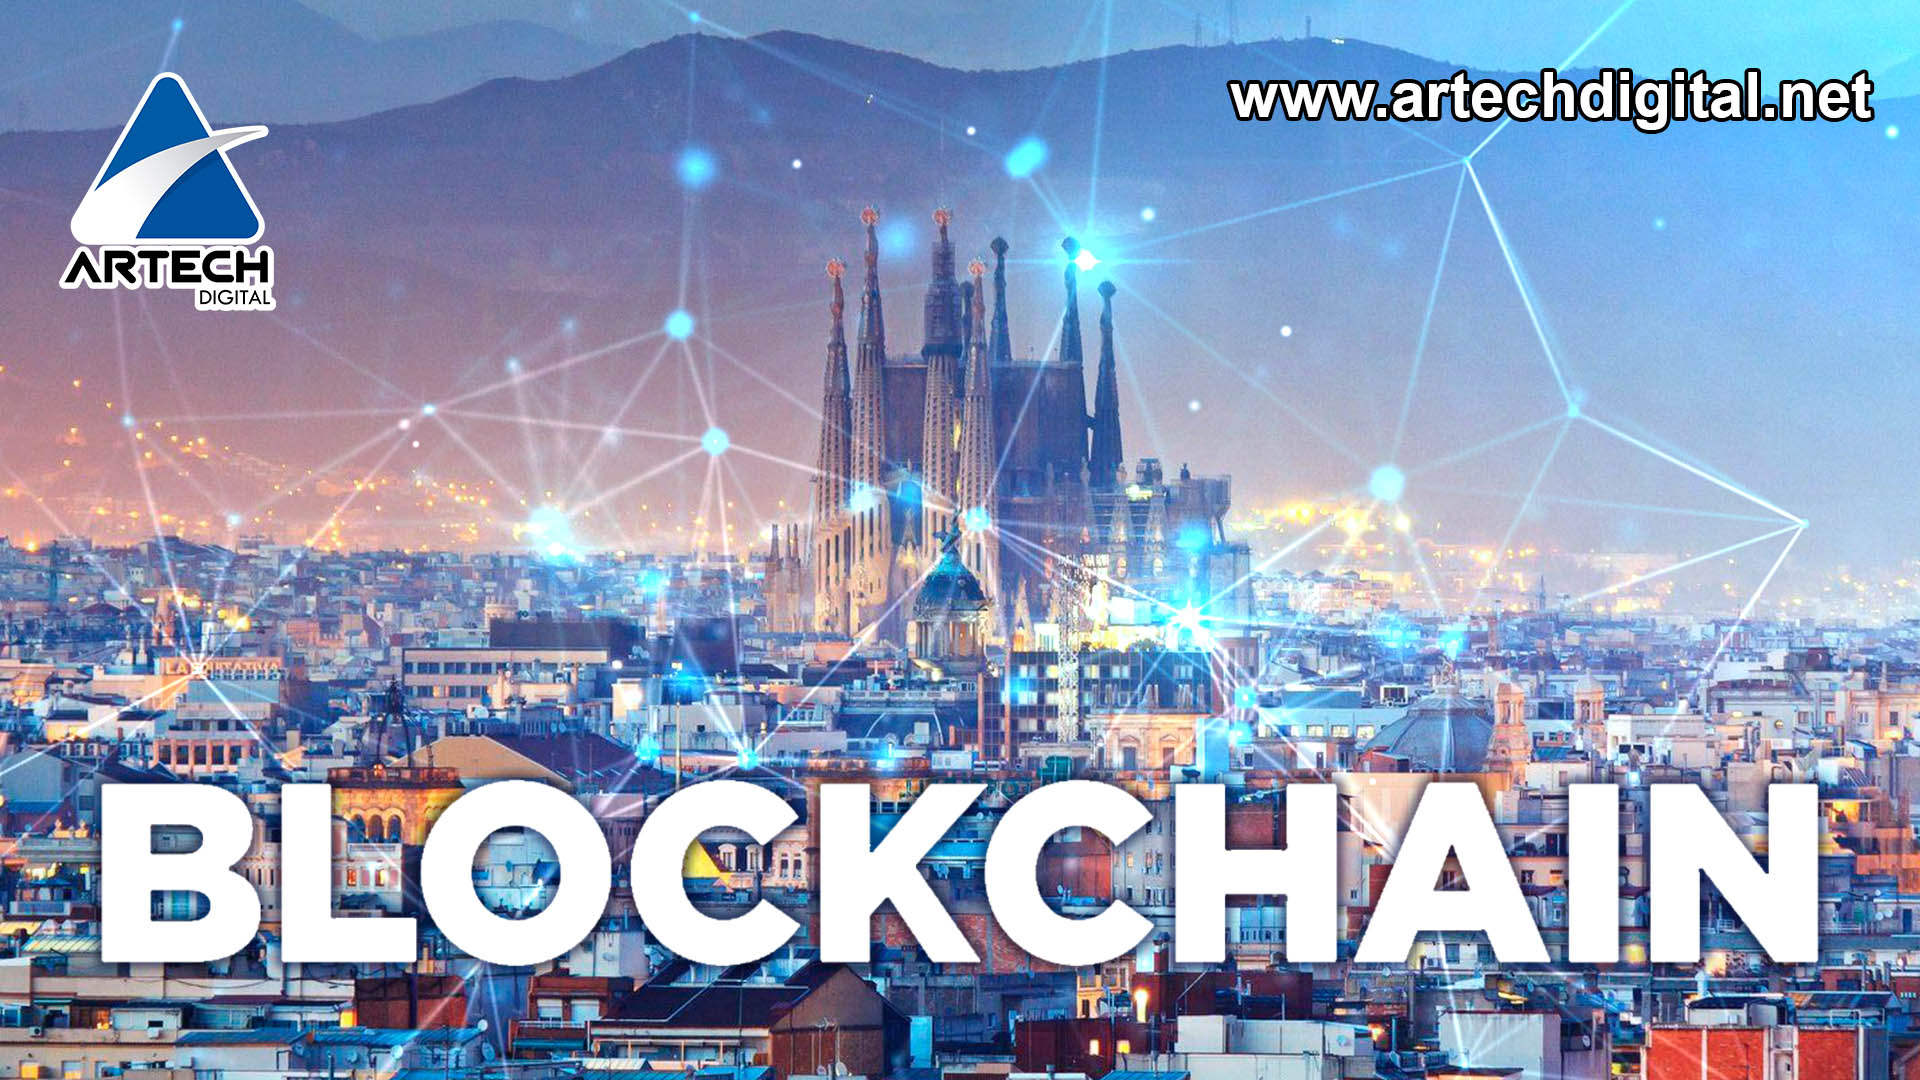 European Convention of Blockchain will arrive in Barcelona